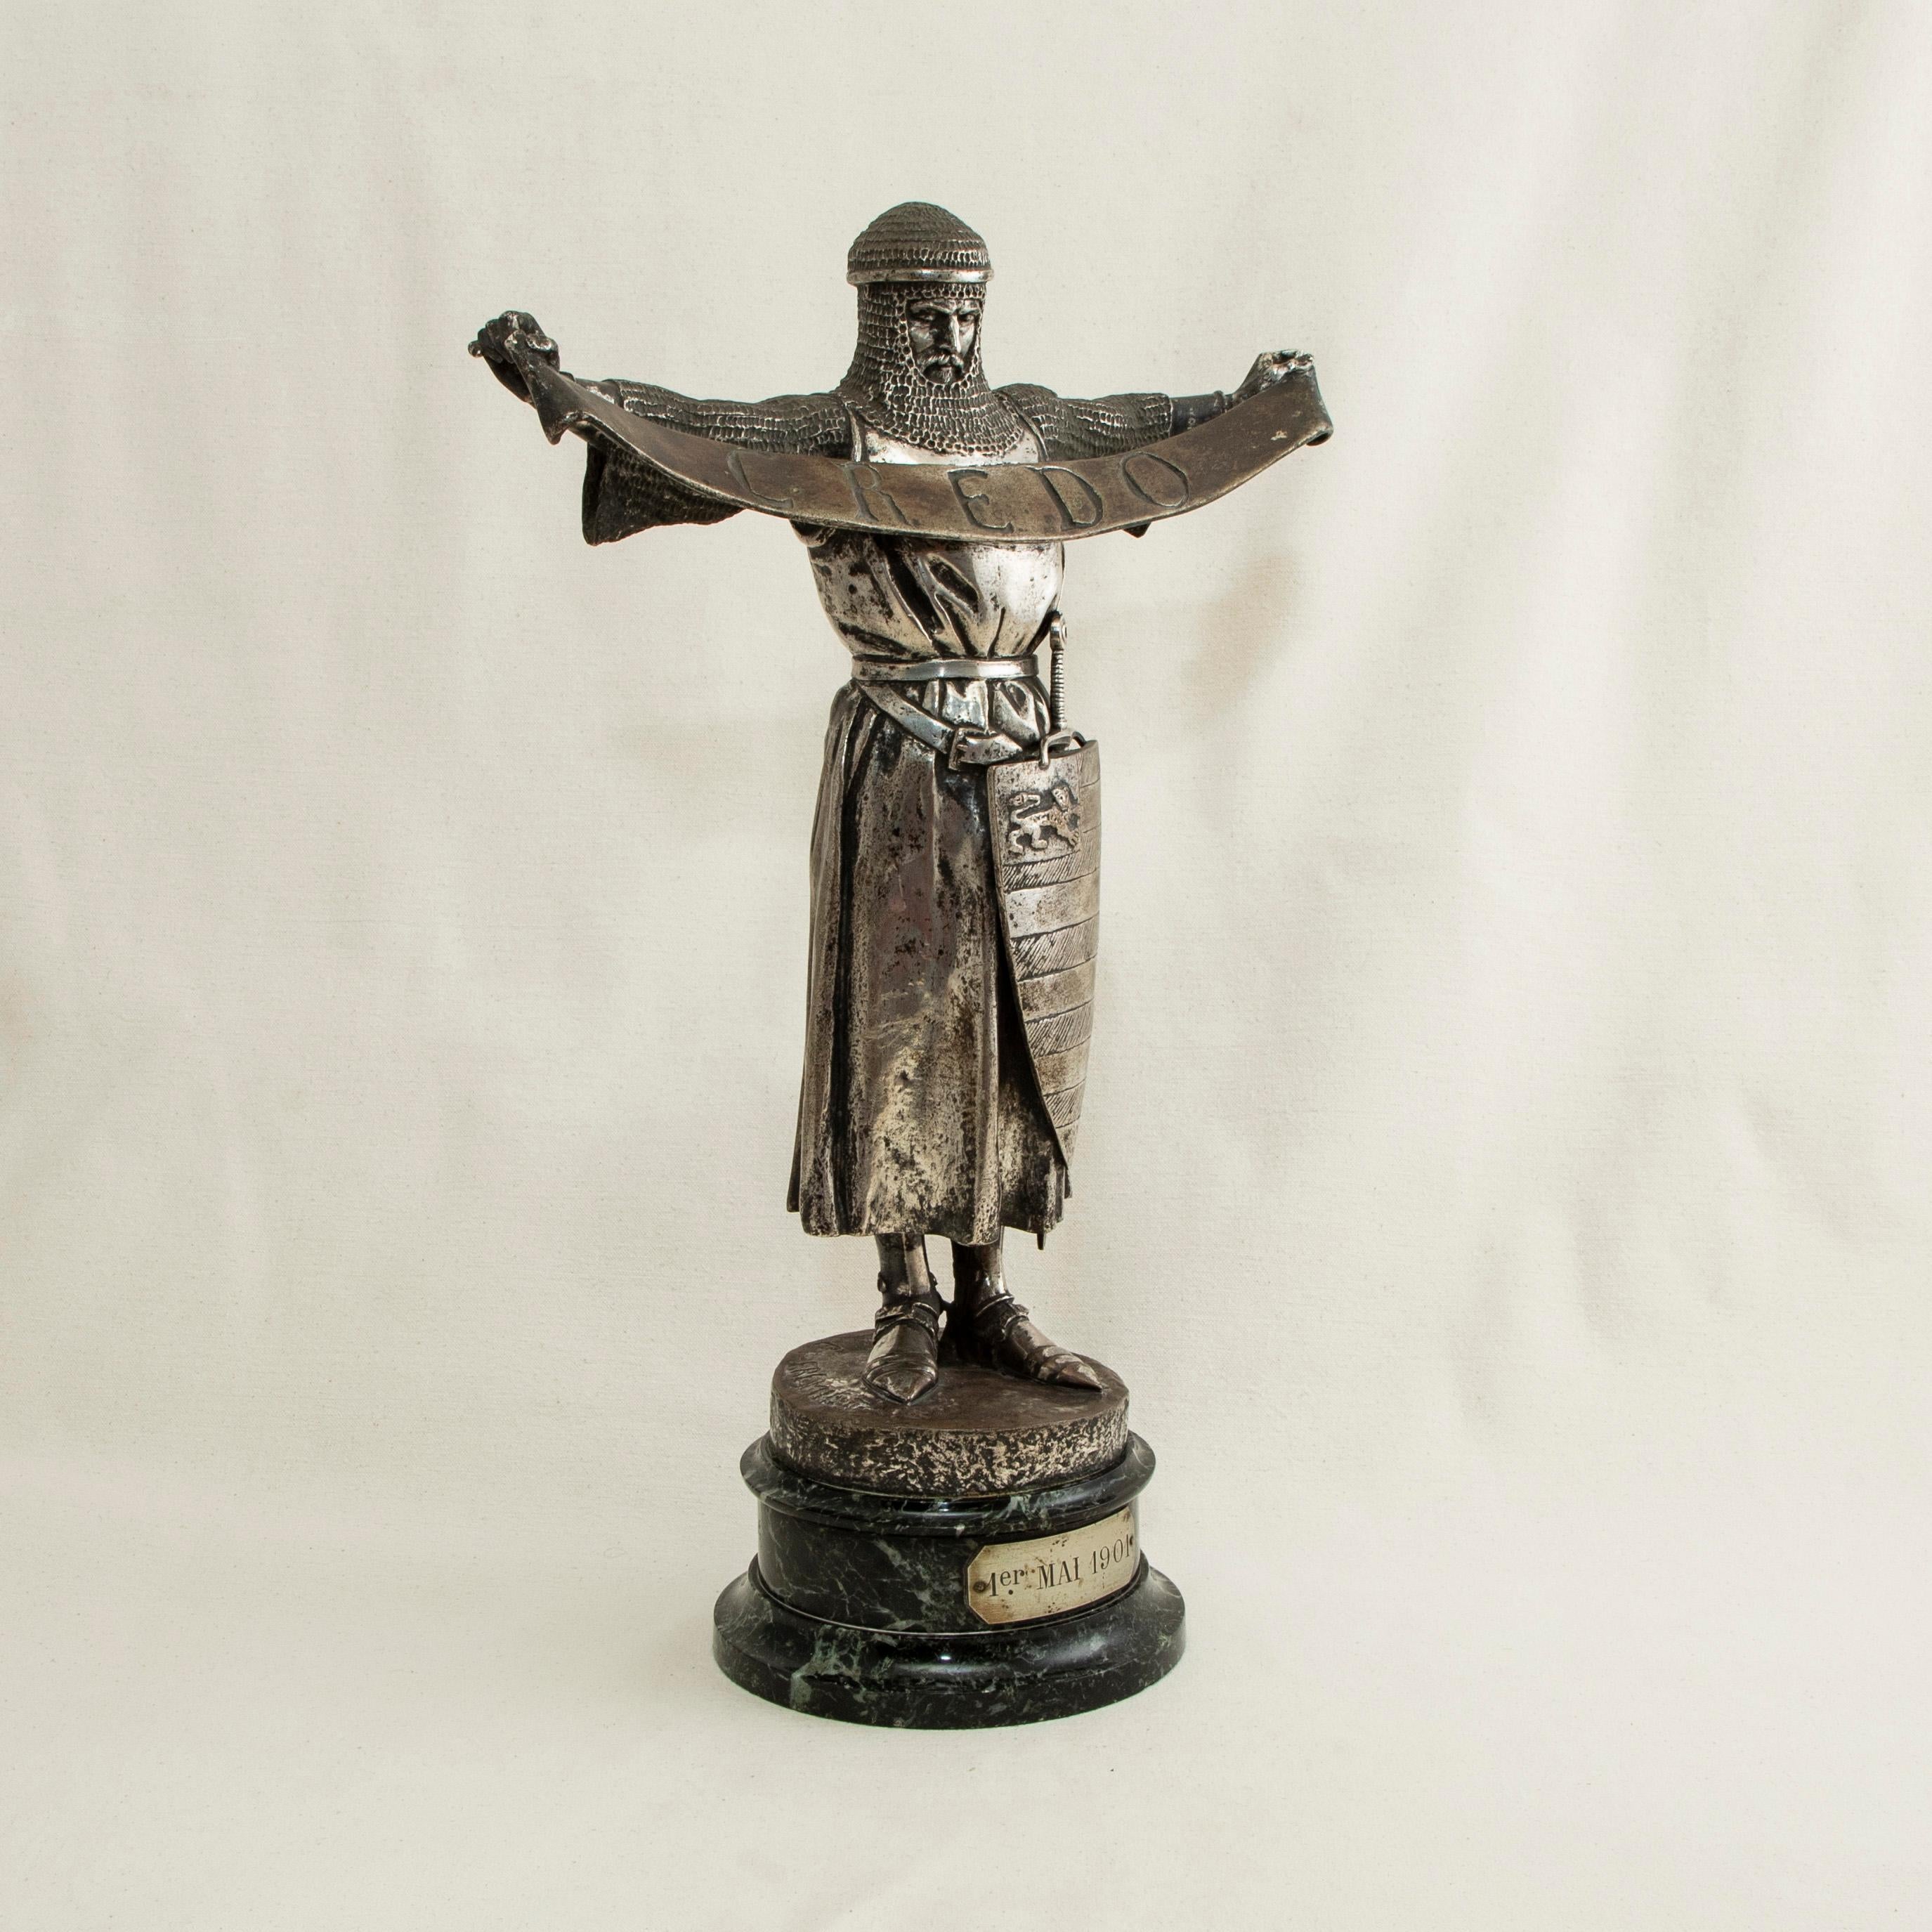 This late nineteenth century silvered bronze sculpture of a knight is signed by the artist, E. Fremiet (Emmanuel Fremiet 1824-1910). The knight stands with arms outstretched holding a banner marked with the Latin word Credo or I believe in English.